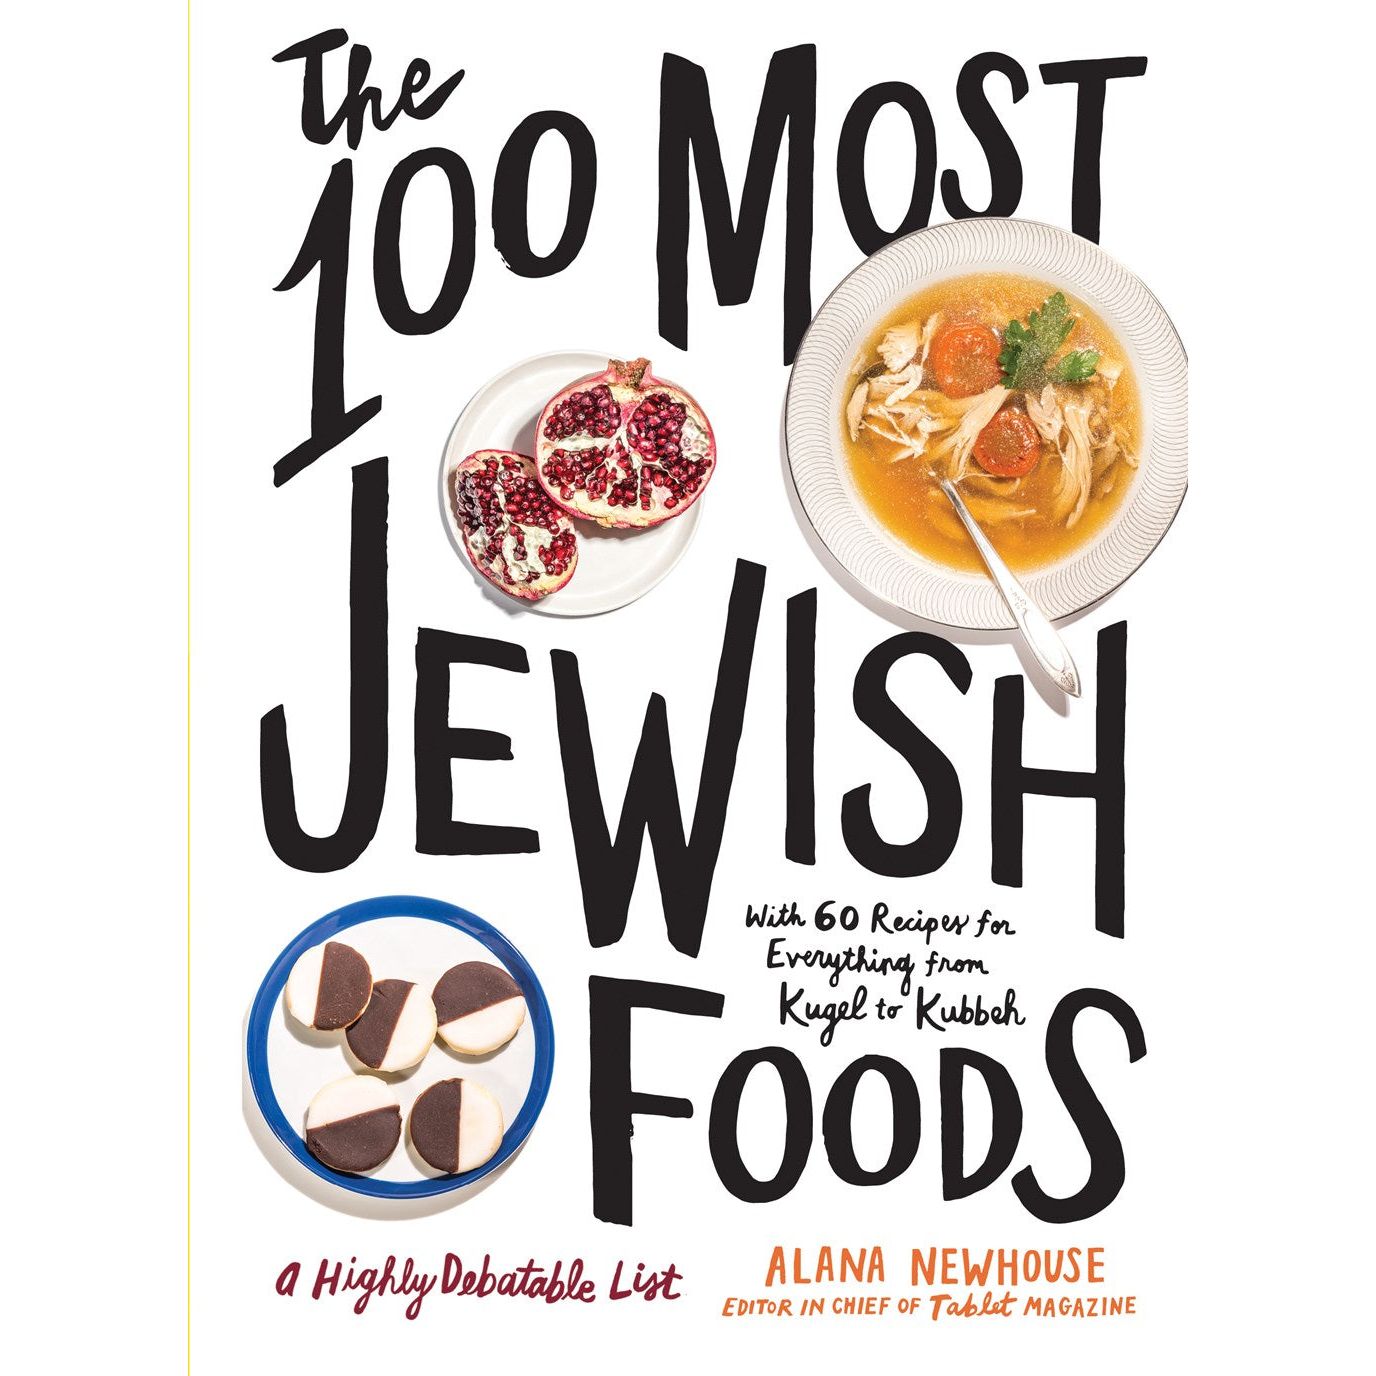 The 100 Most Jewish Foods (Alana Newhouse)